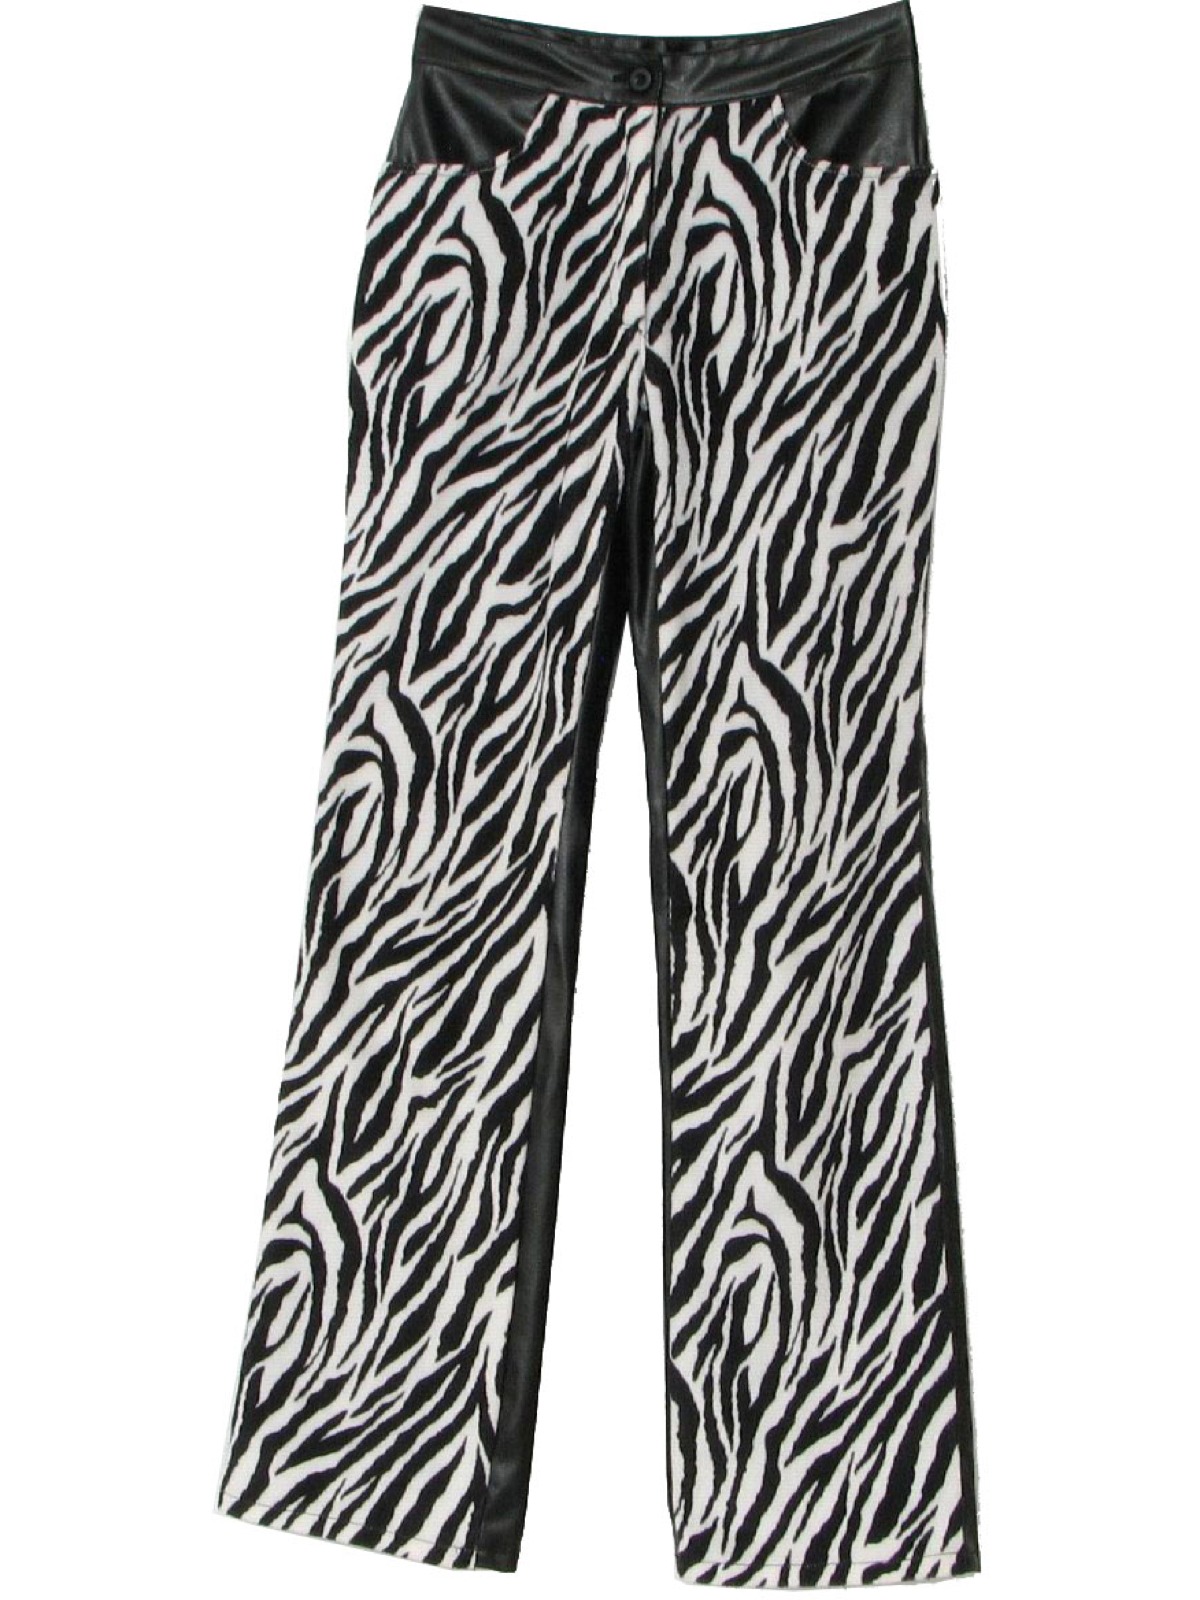 Retro 90s Pants (Rave4Real) : 90s -Rave4Real- Womens black and white ...